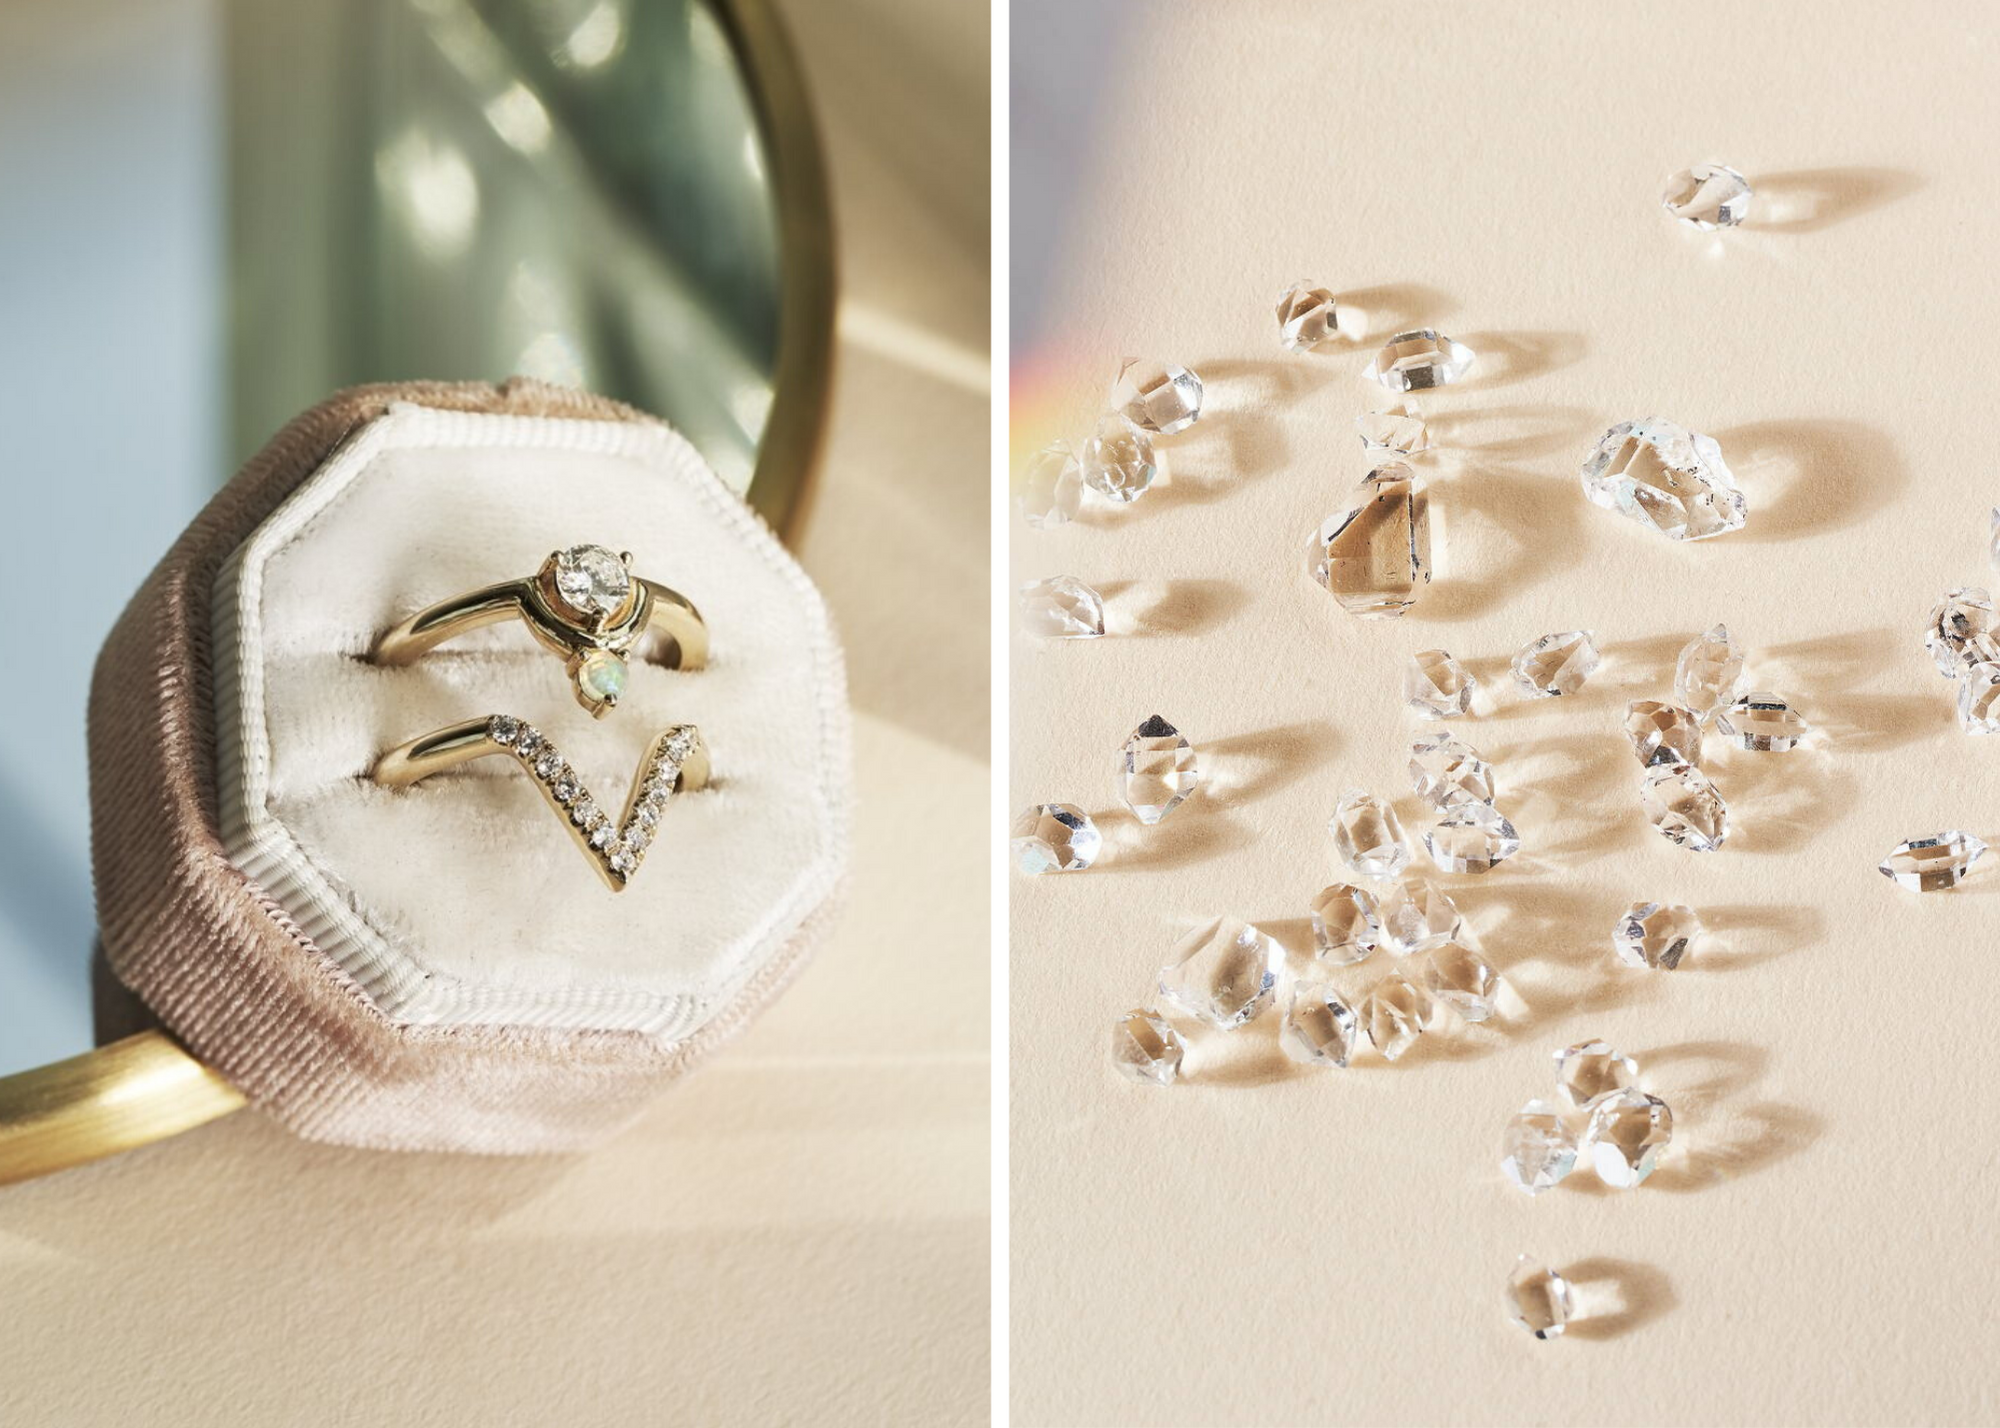 Ethical Options for Wedding and Engagement Jewelry featuring Angela Monaco